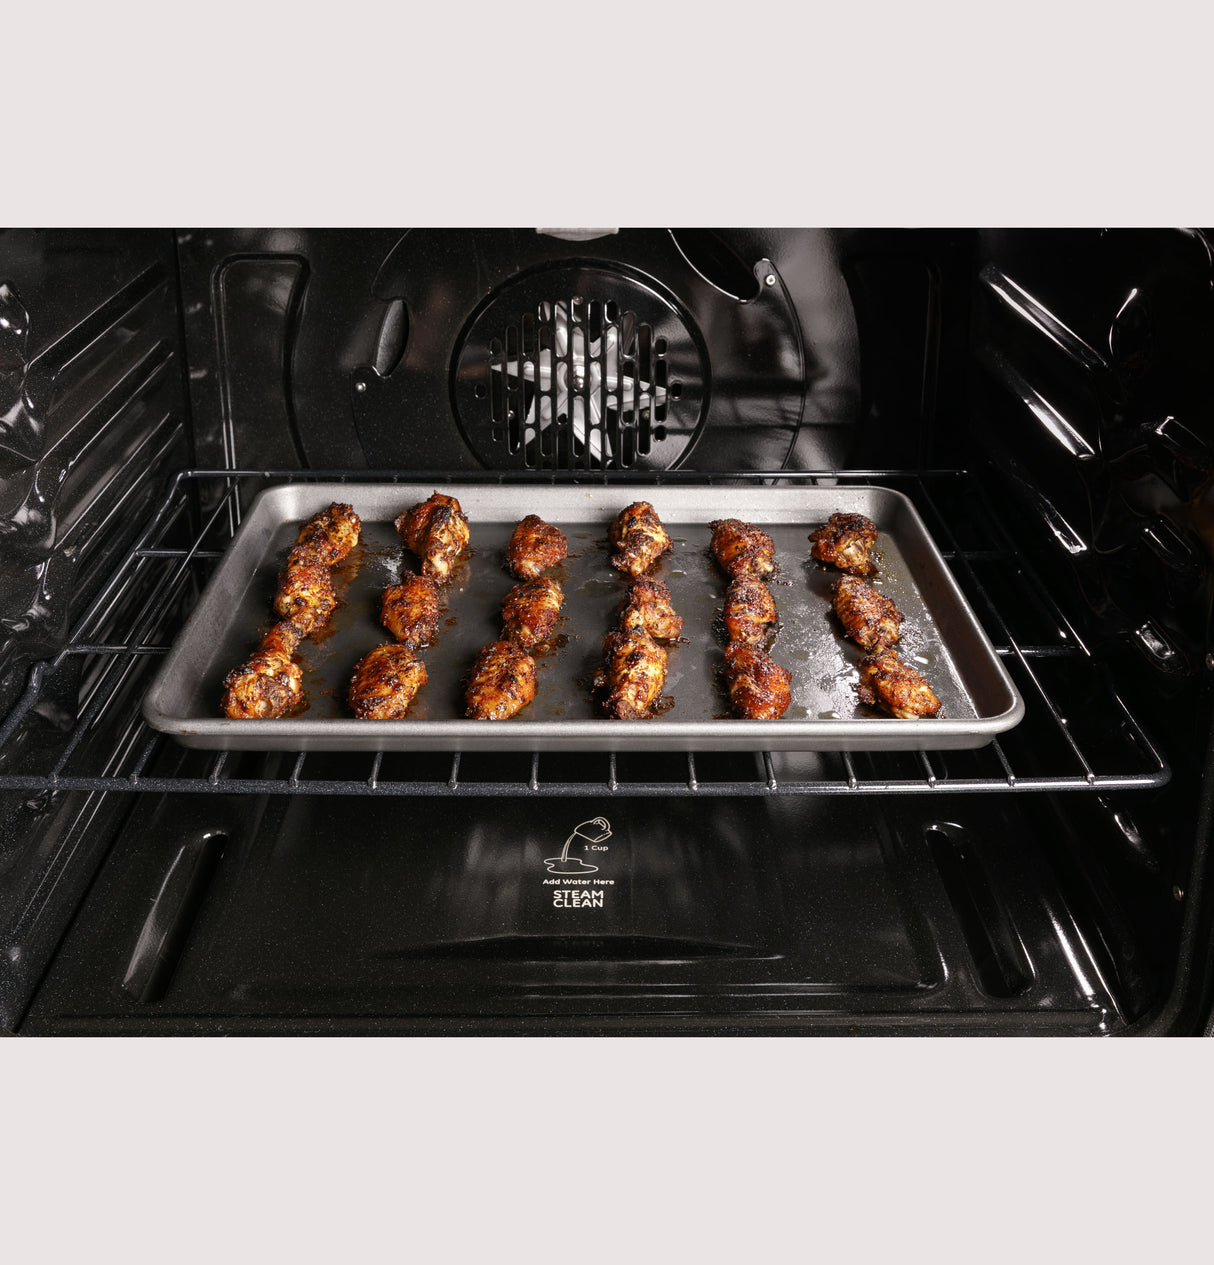 GE Profile(TM) 30" Free-Standing Gas Double Oven Convection Fingerprint Resistant Range with No Preheat Air Fry - (PGB965YPFS)